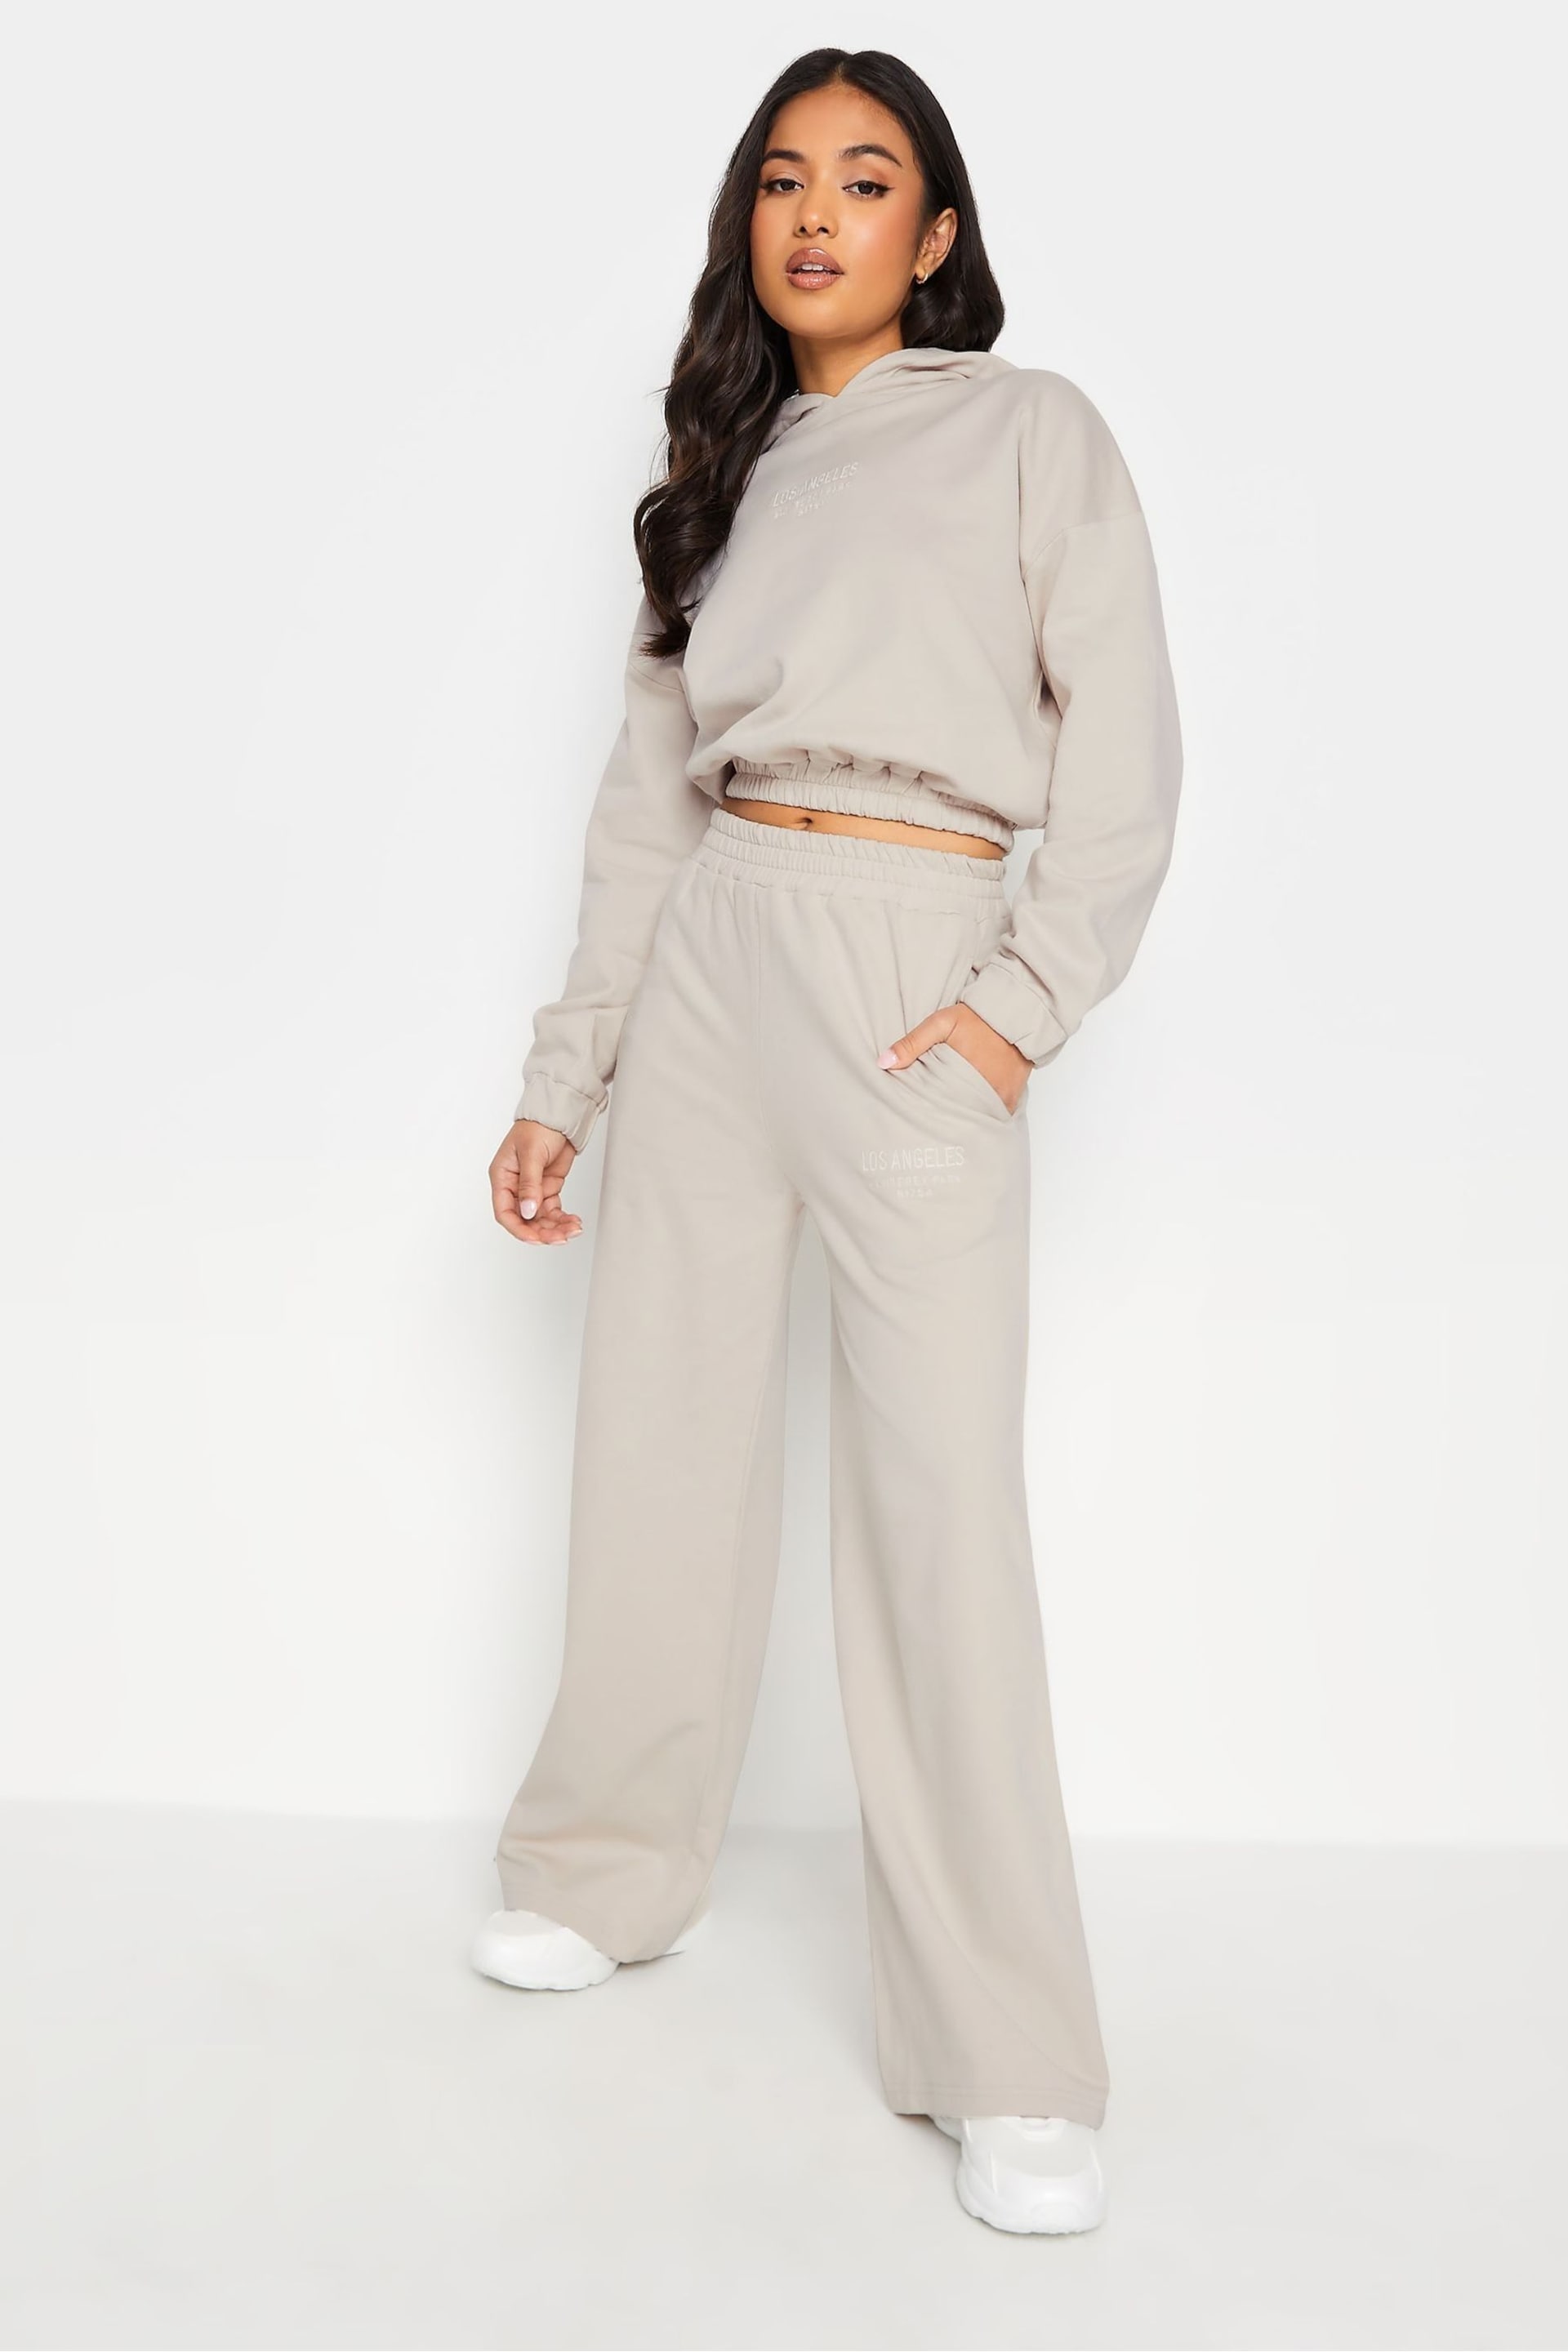 PixieGirl Petite Natural Los Angeles Embroidered Wide Leg Joggers - Image 2 of 5